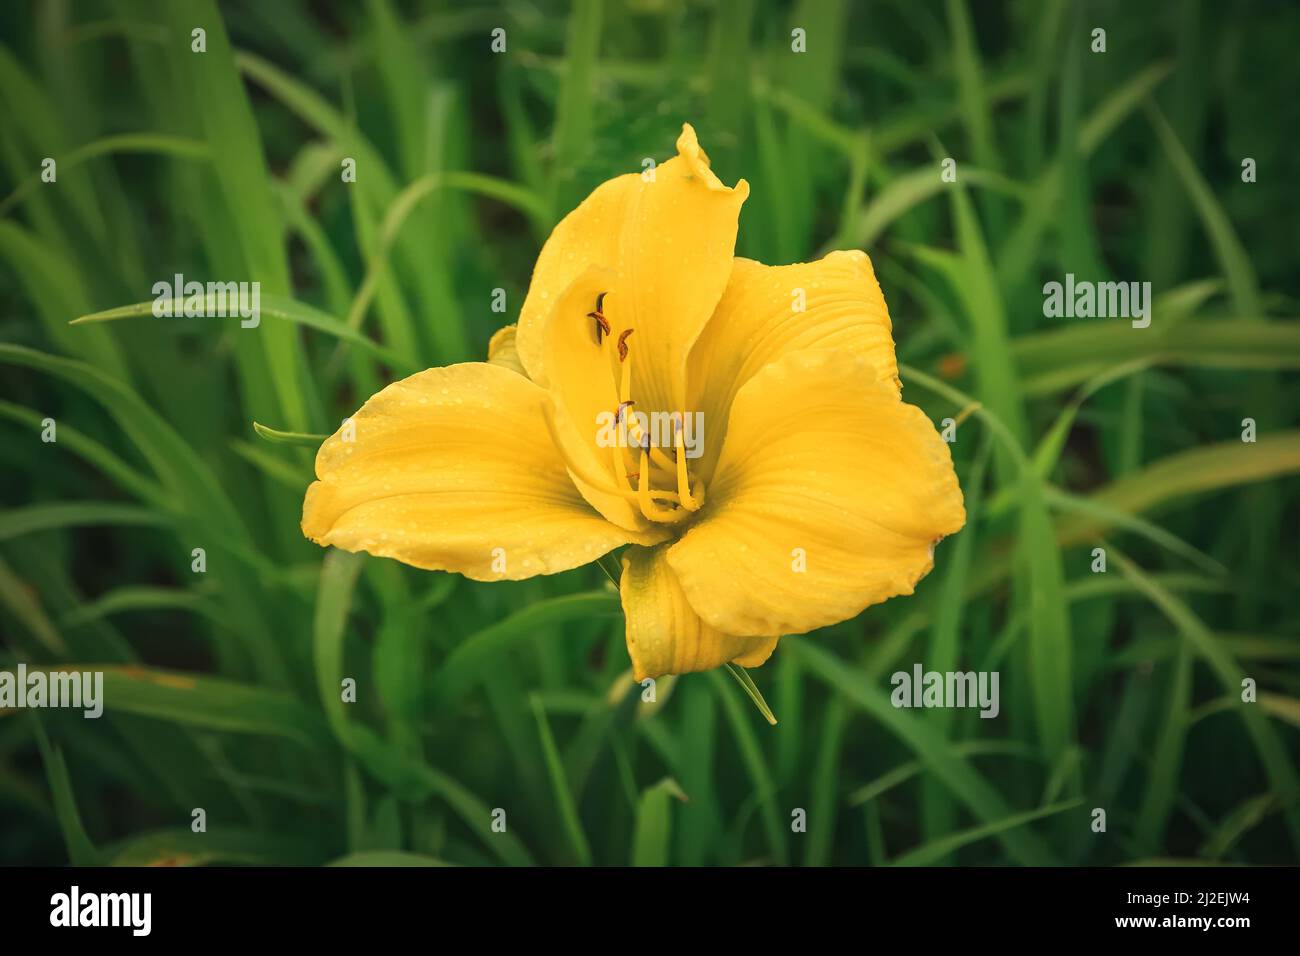 Closeup of a beautiful flower. Yellow lily with green grasses in the background. Stock Photo